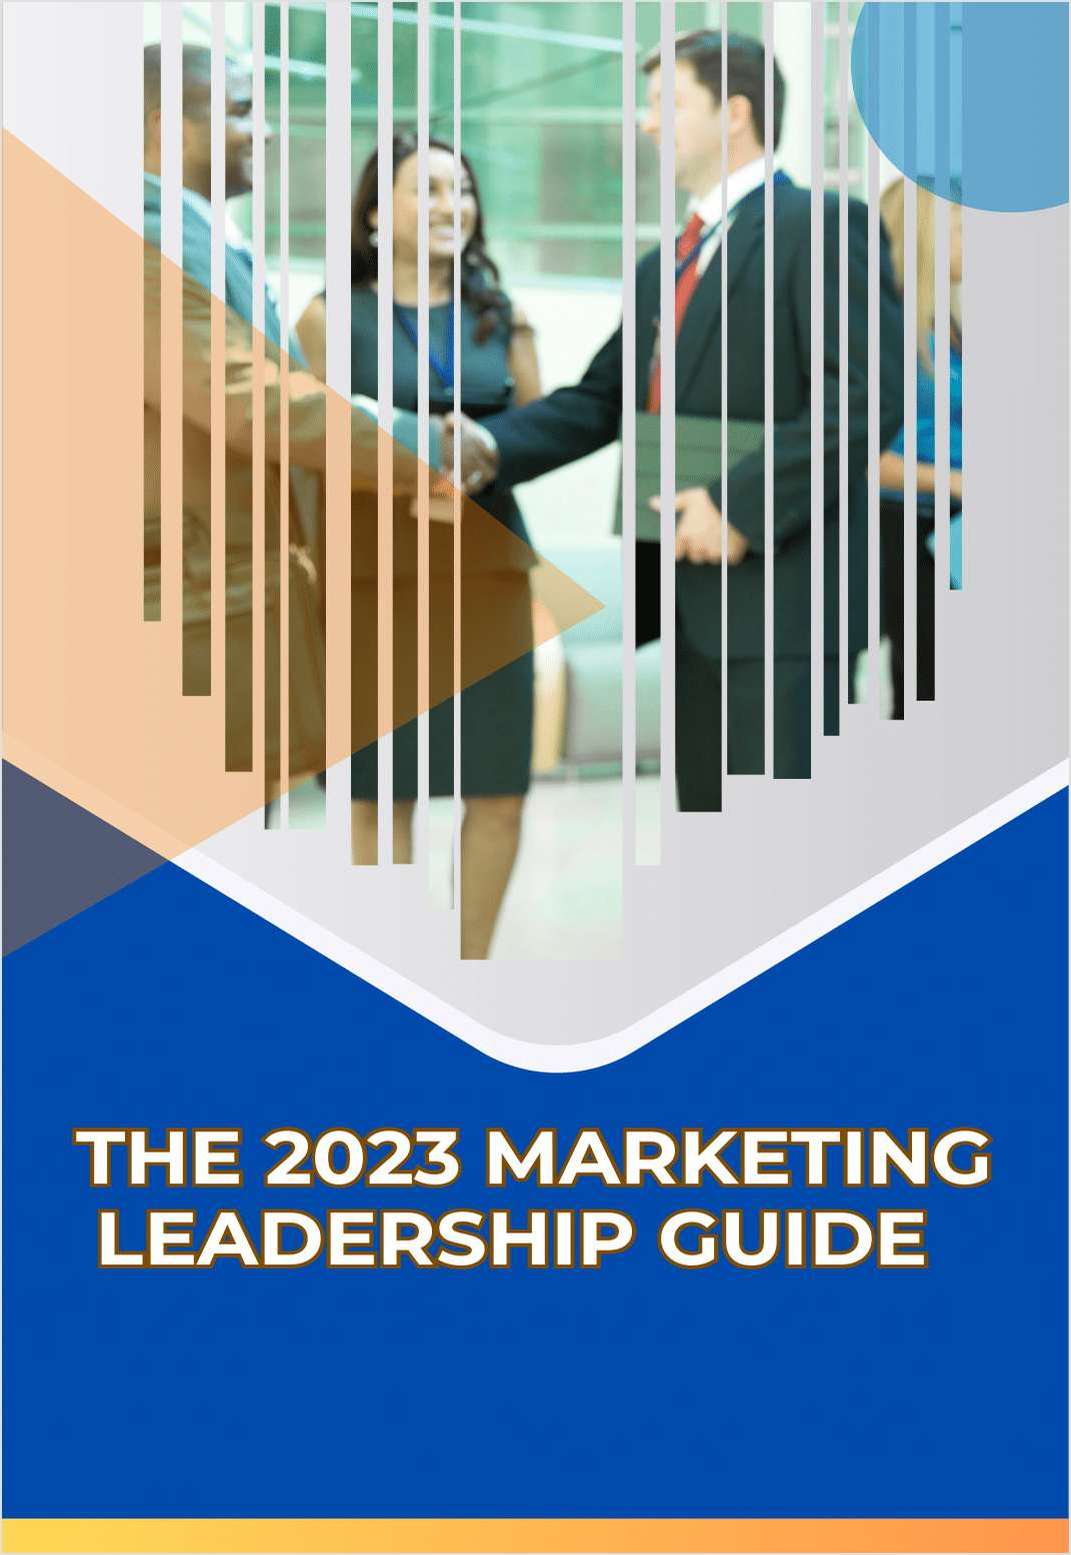 The 2023 Marketing Leadership Guide